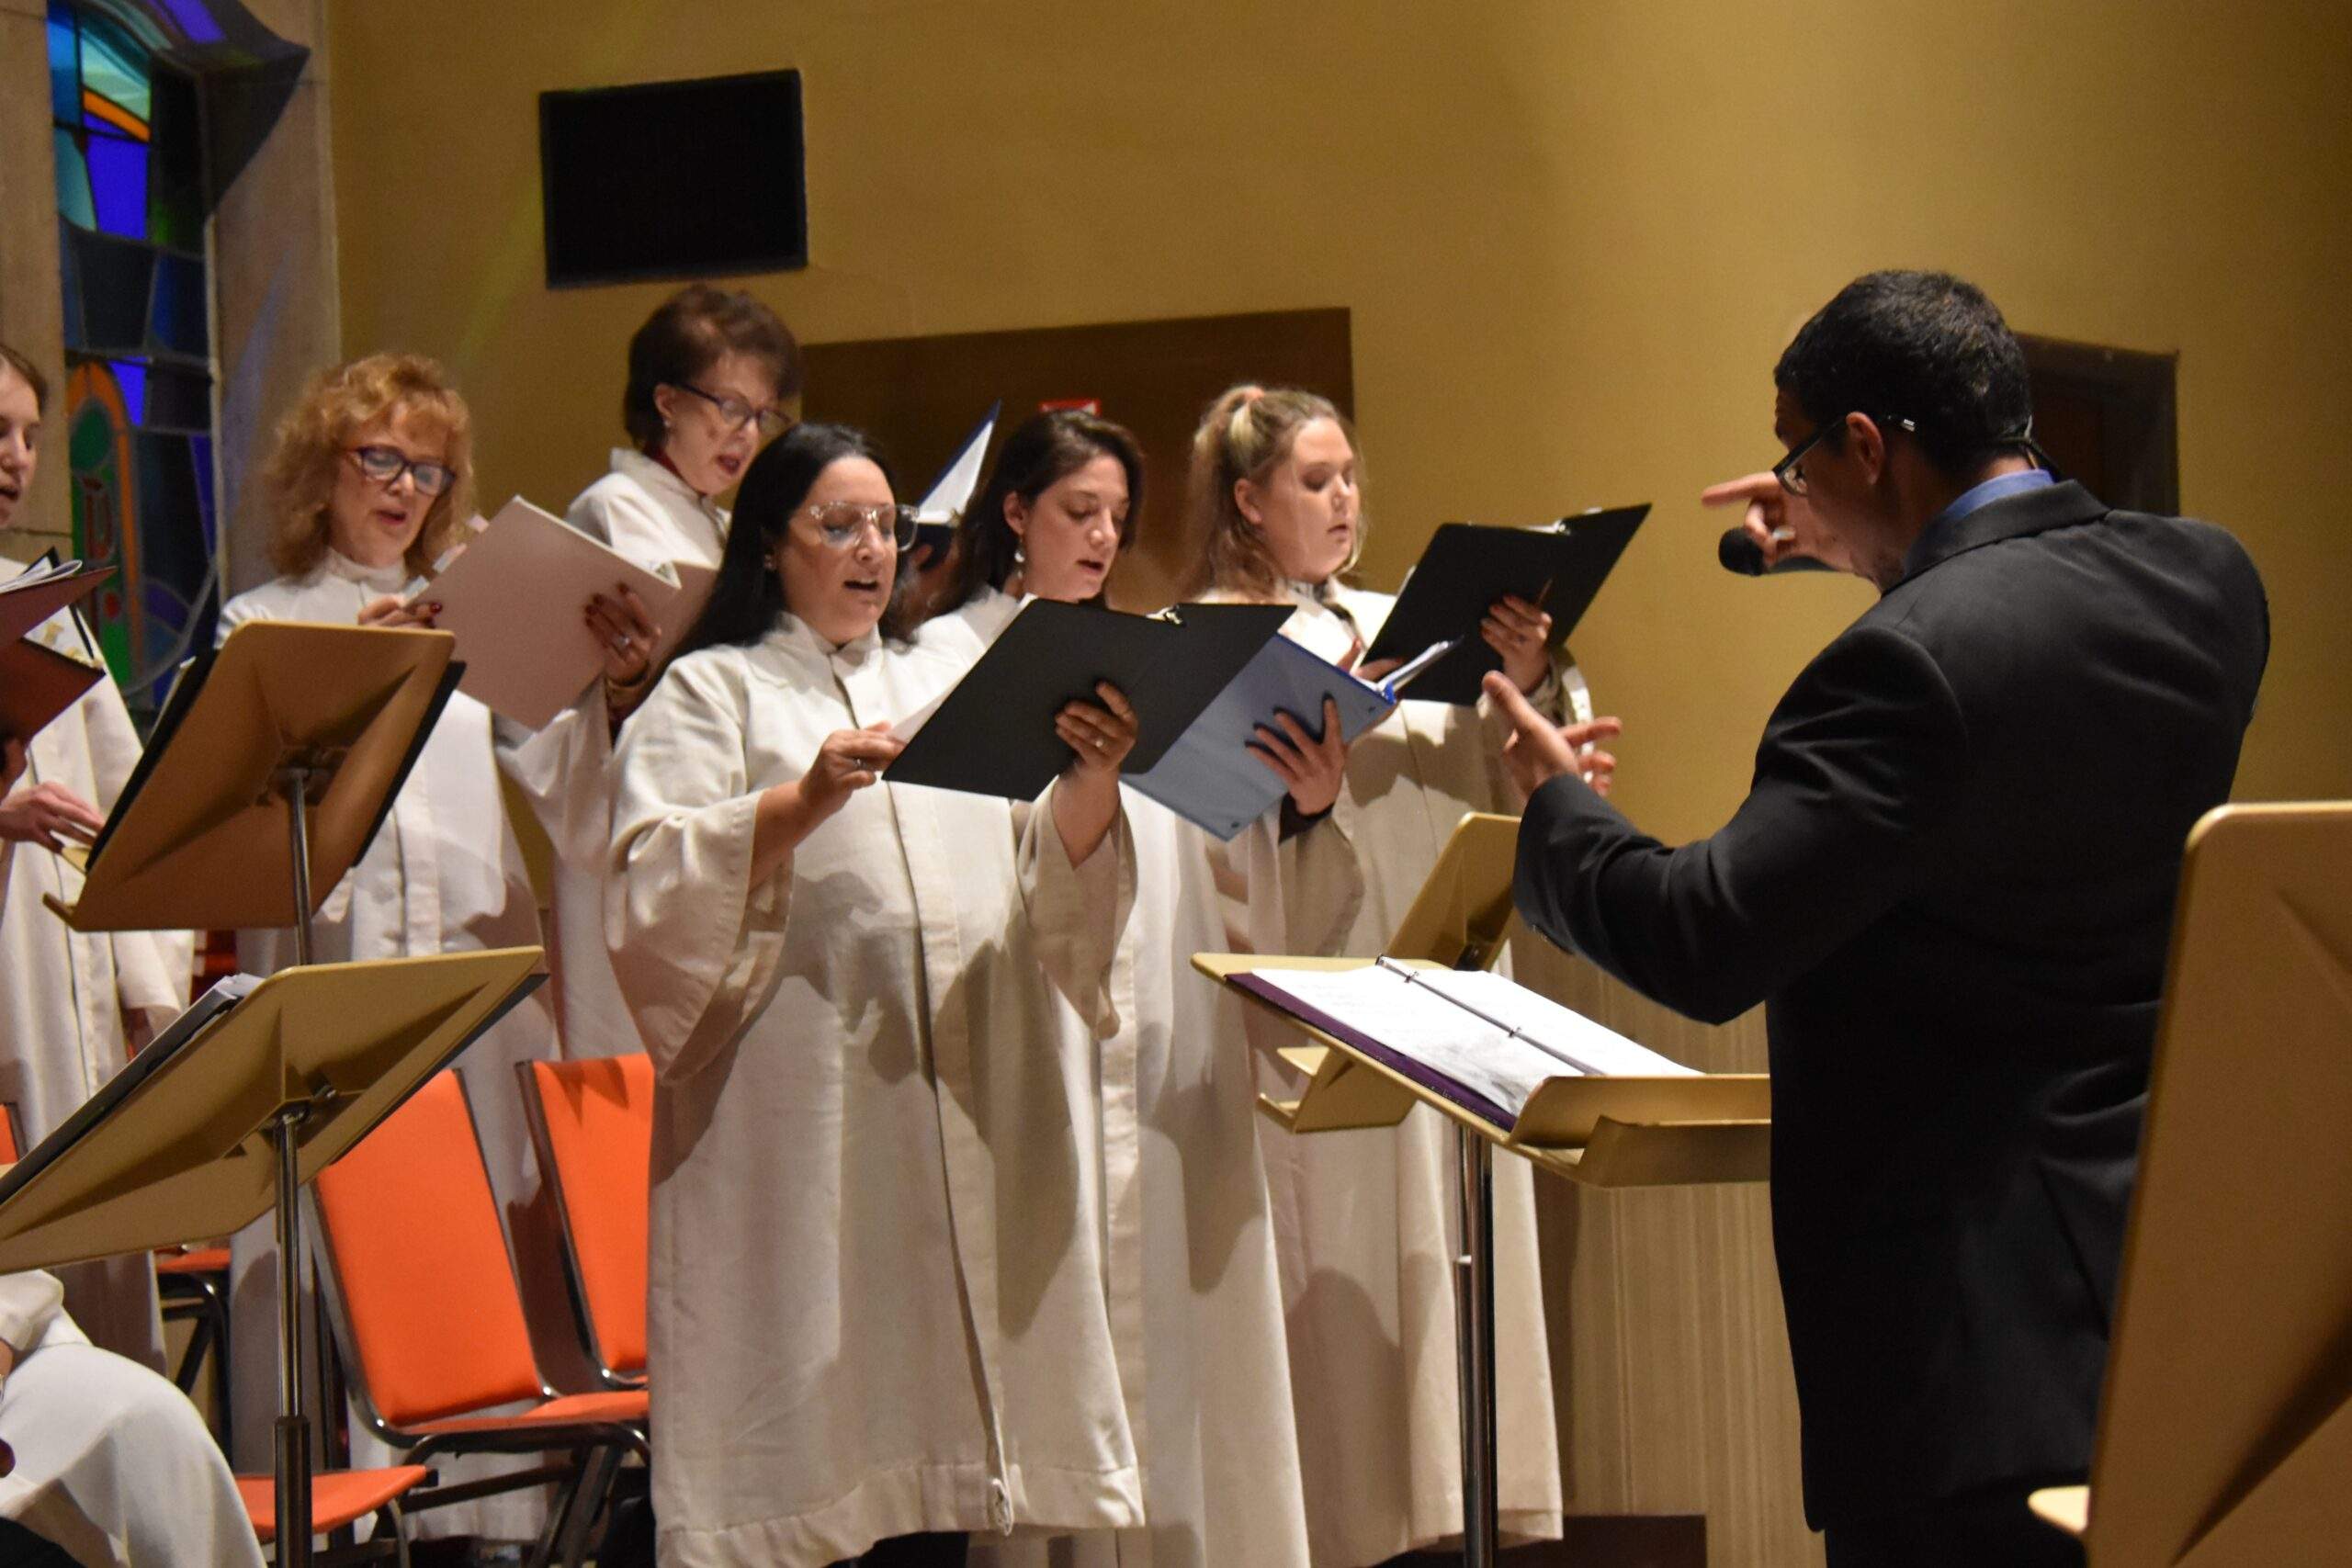 Ralph Holtzhauser conducts the St. Columba Cathedral Choir